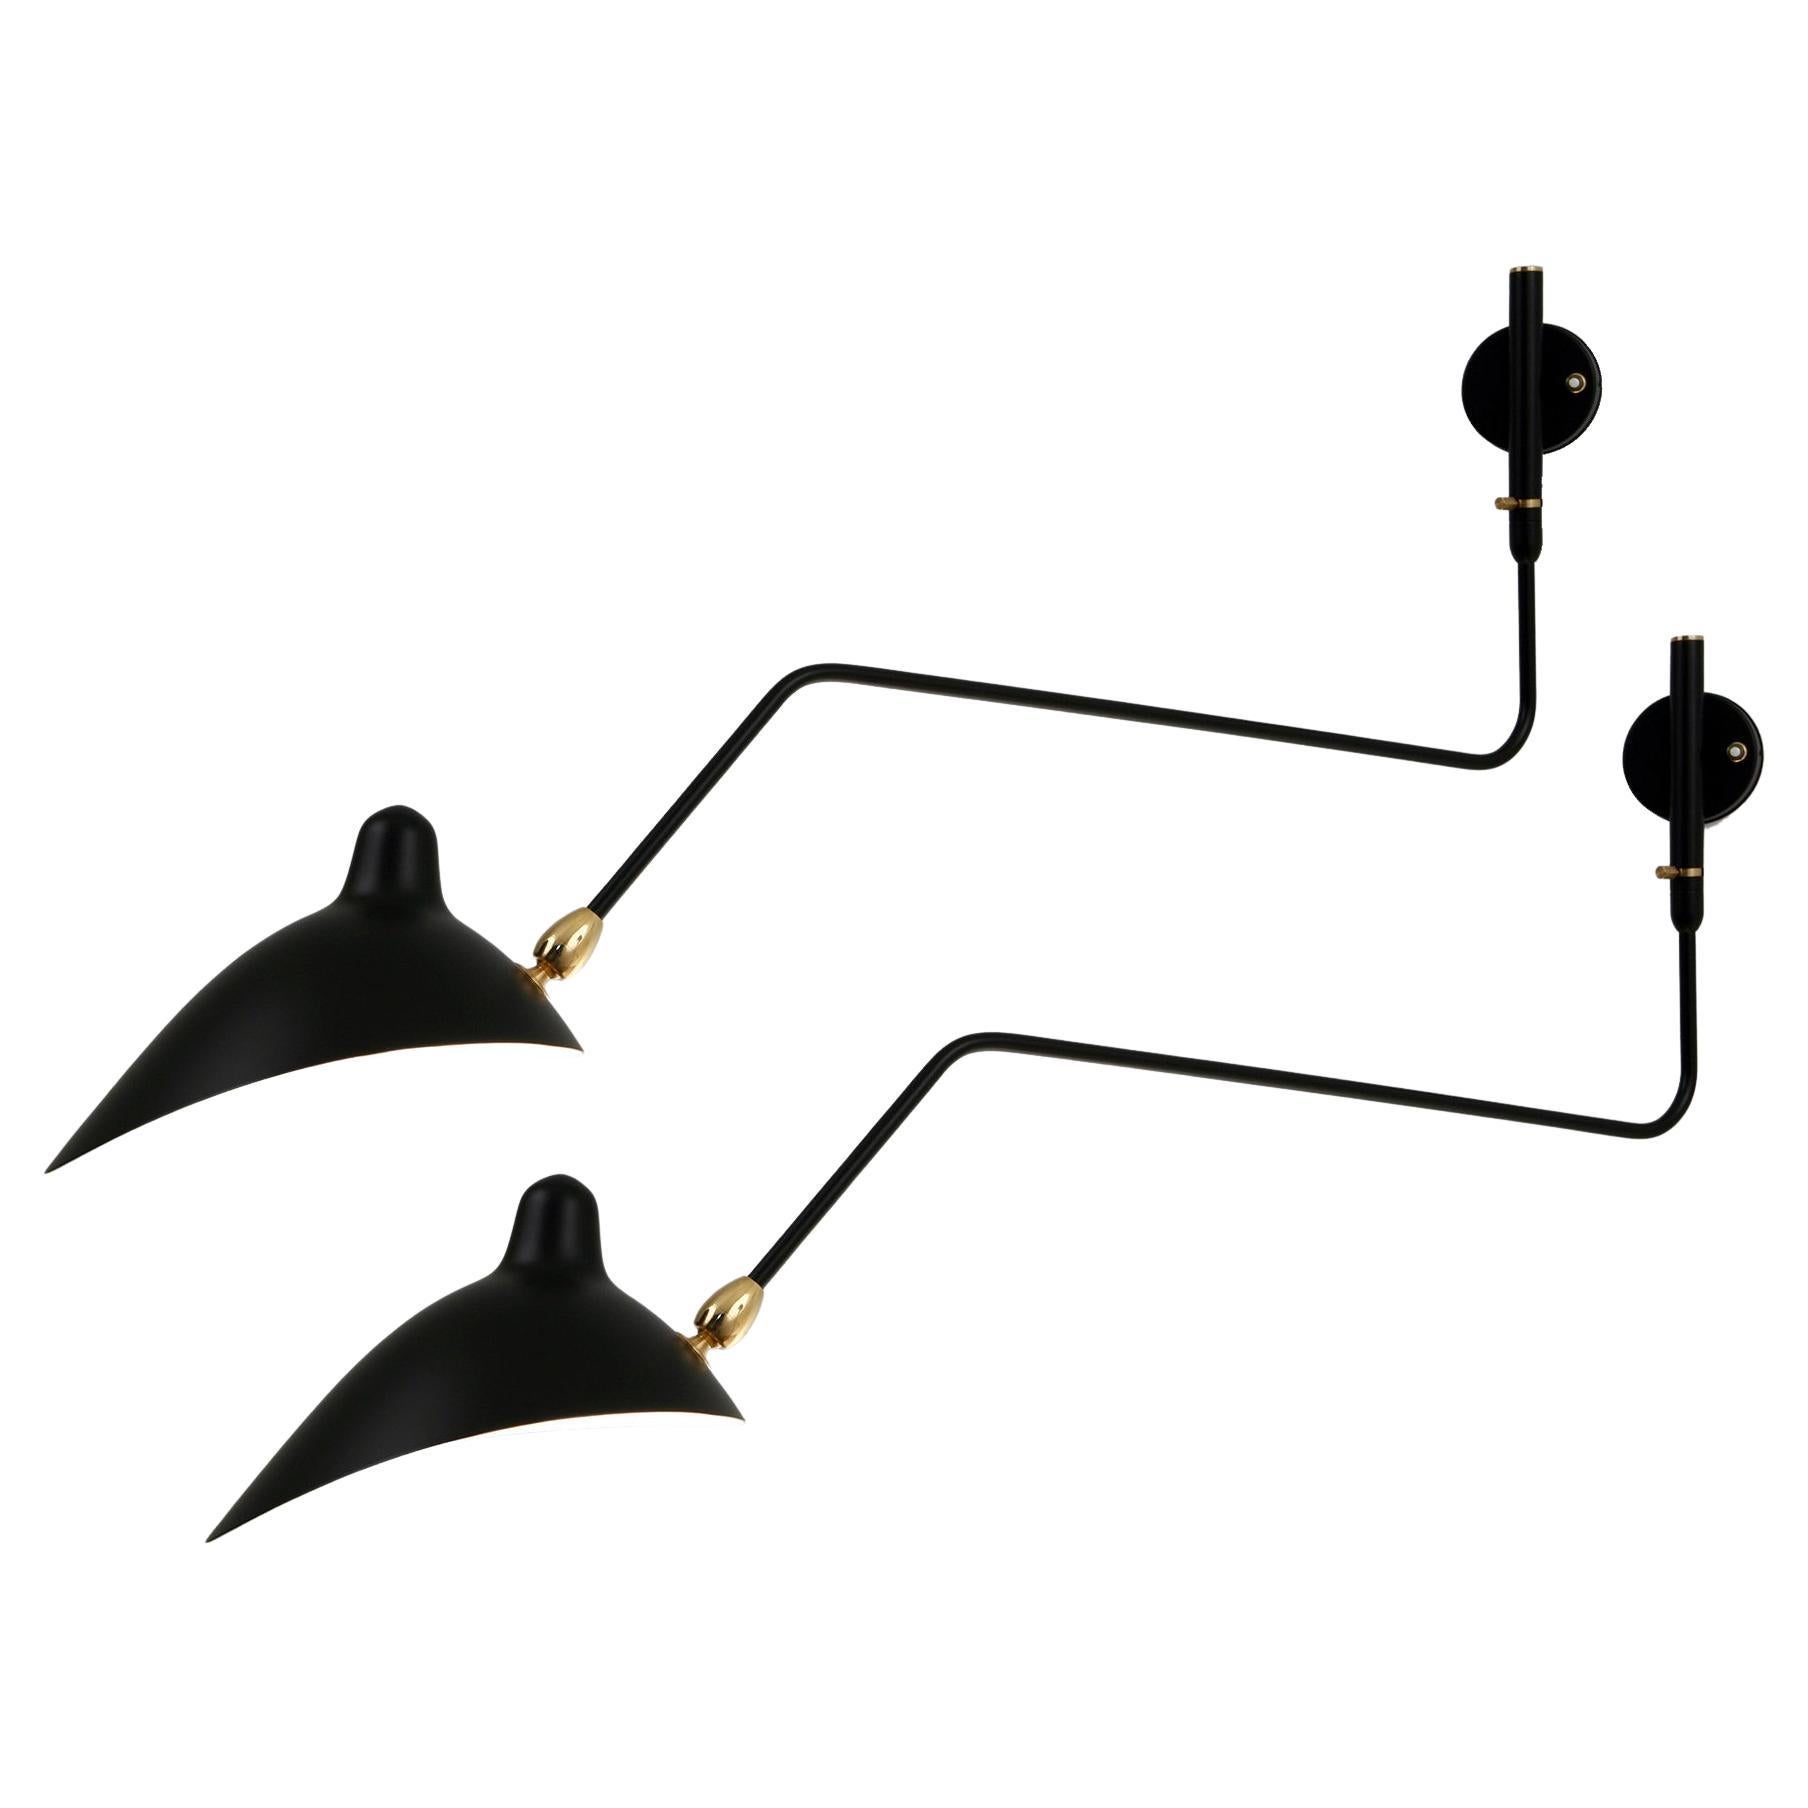 Serge Mouille - Pair of Rotating Sconces with 1 Curved Arm in Black - IN STOCK!